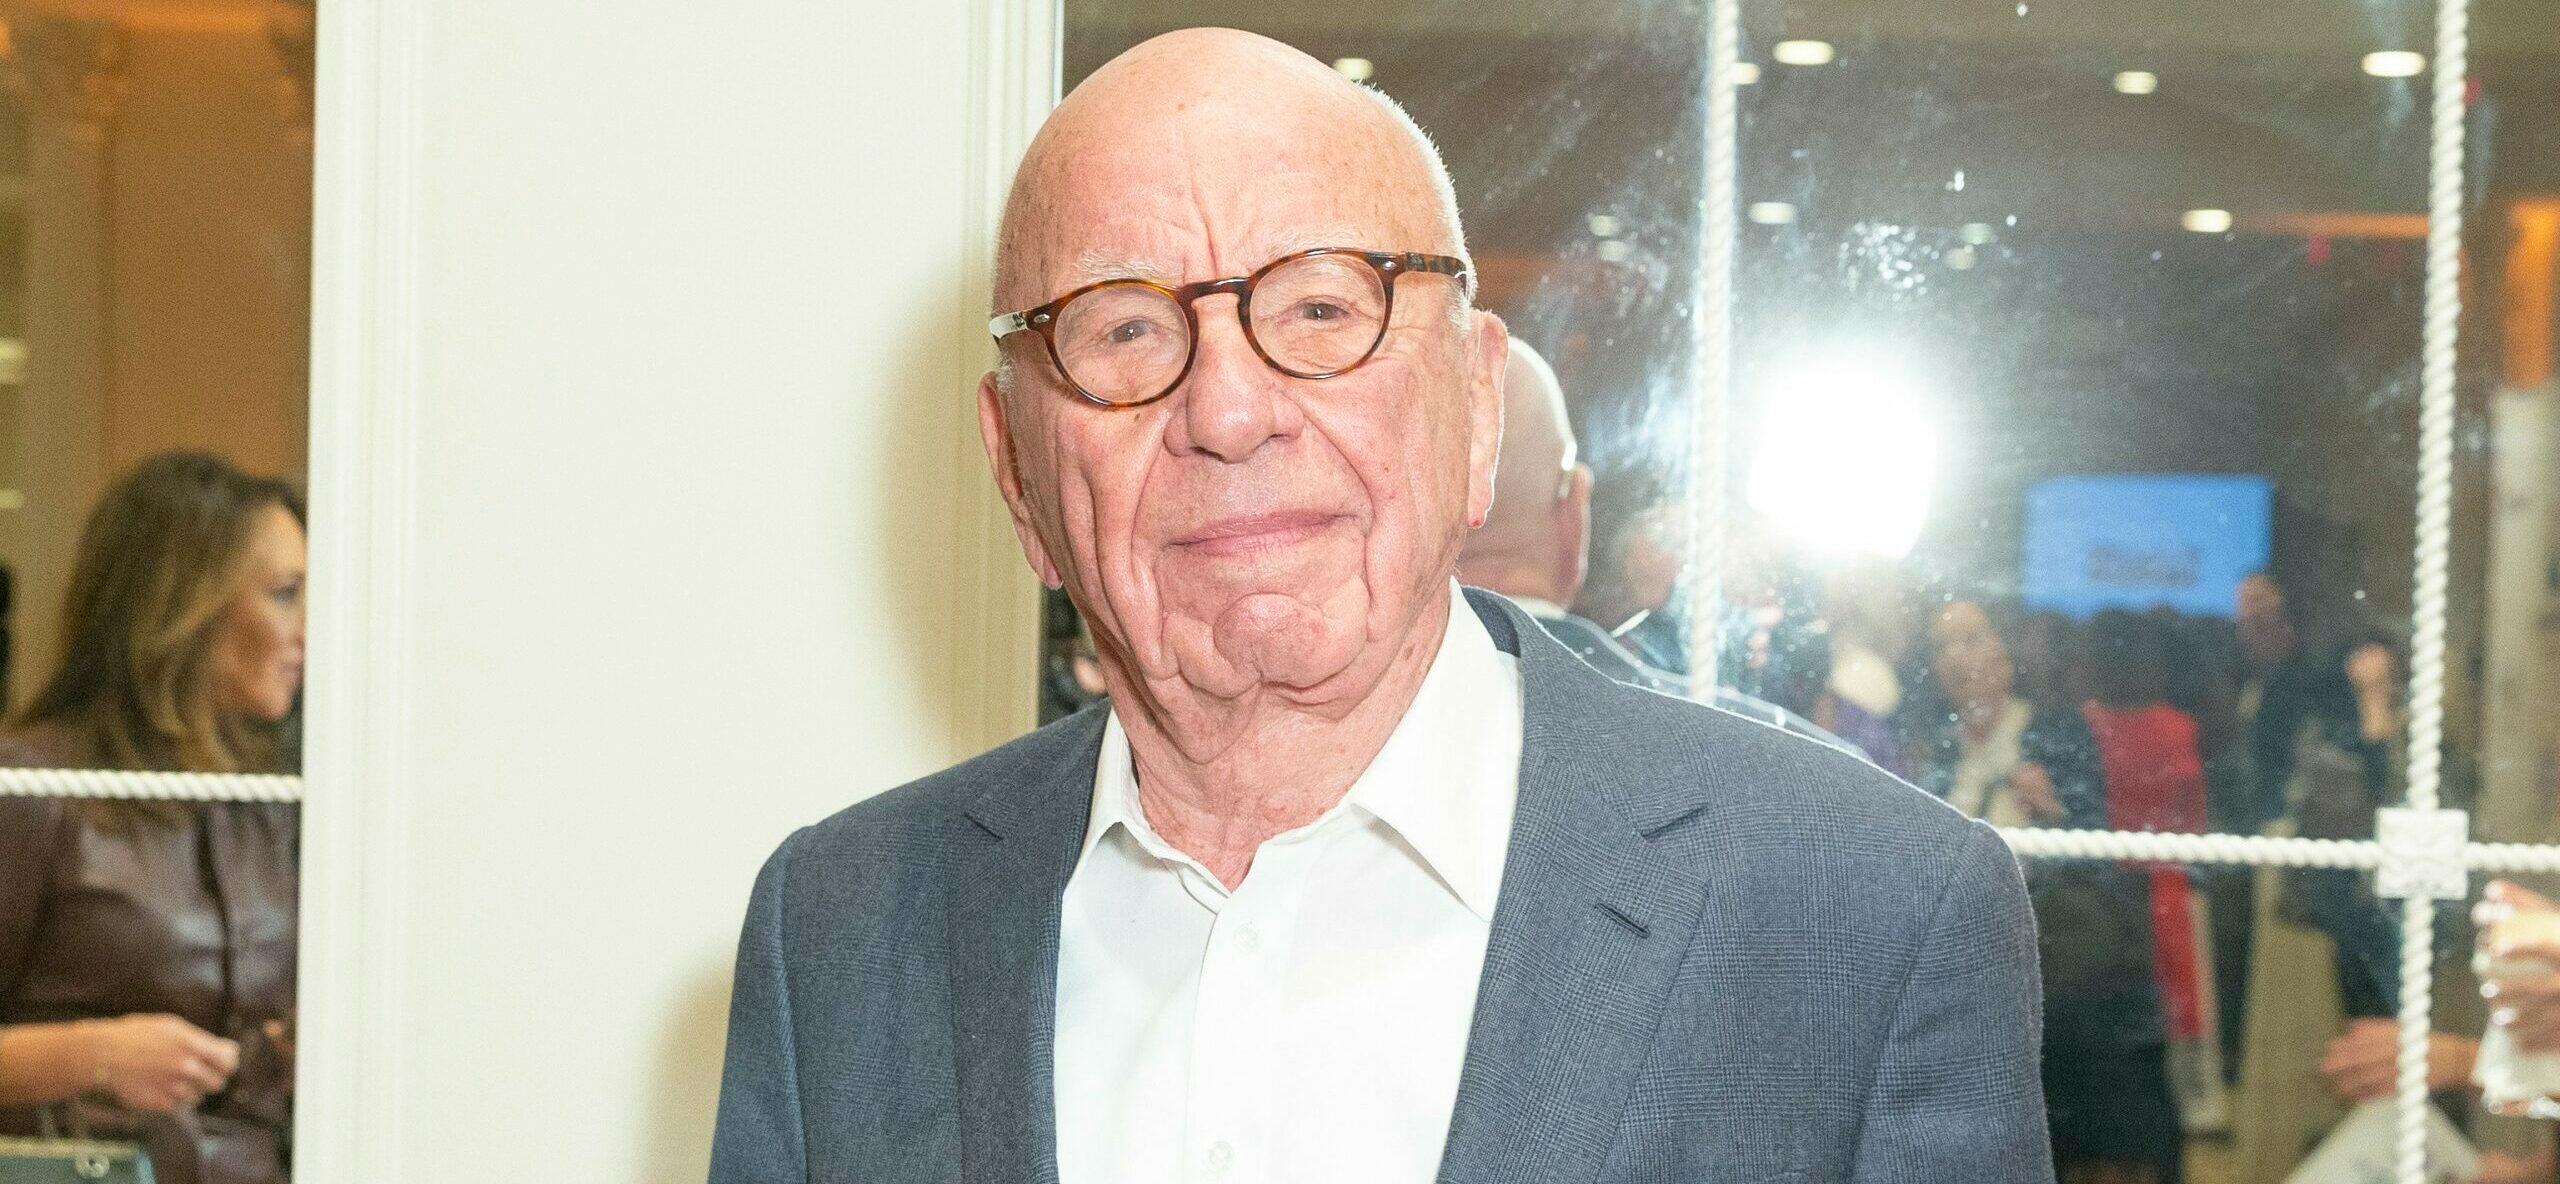 92-Year-Old Rupert Murdoch ENGAGED To Girlfriend, Ann Lesley-Smith, Will Tie The Knot This Year